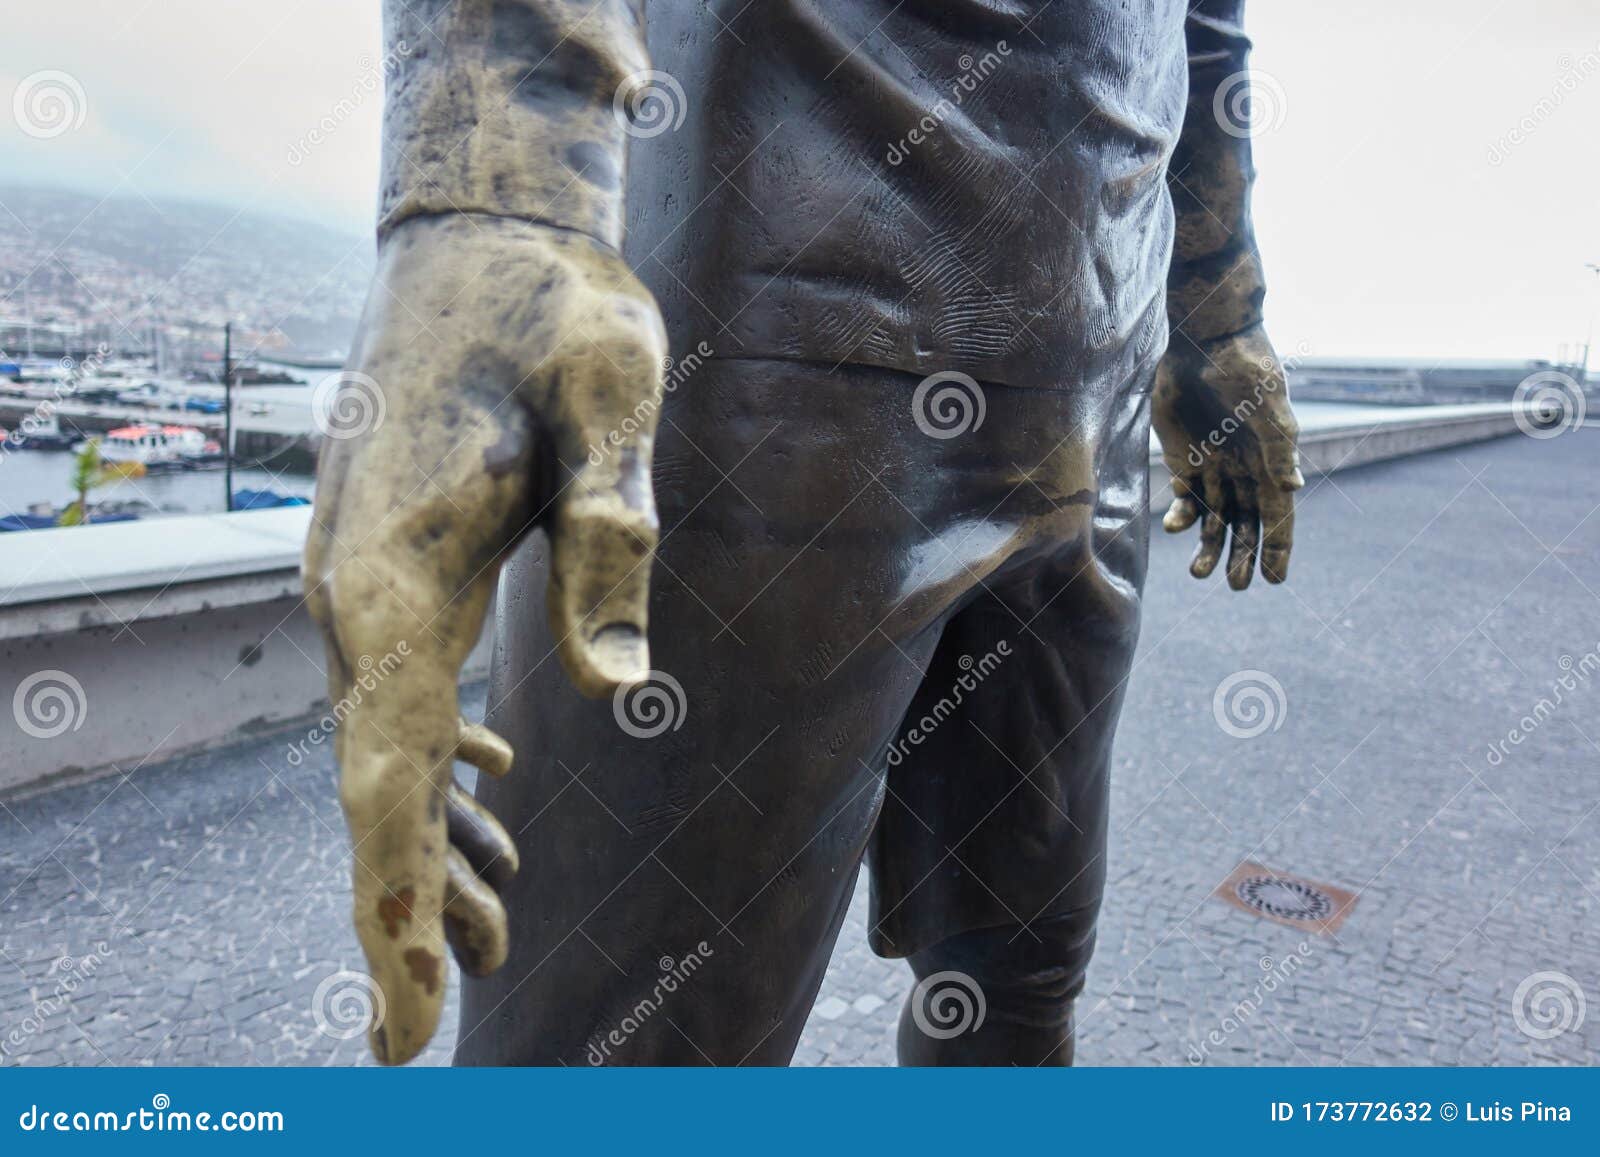 Cristiano Ronaldo Statue In Funchal Madeira In Front Of Cr7